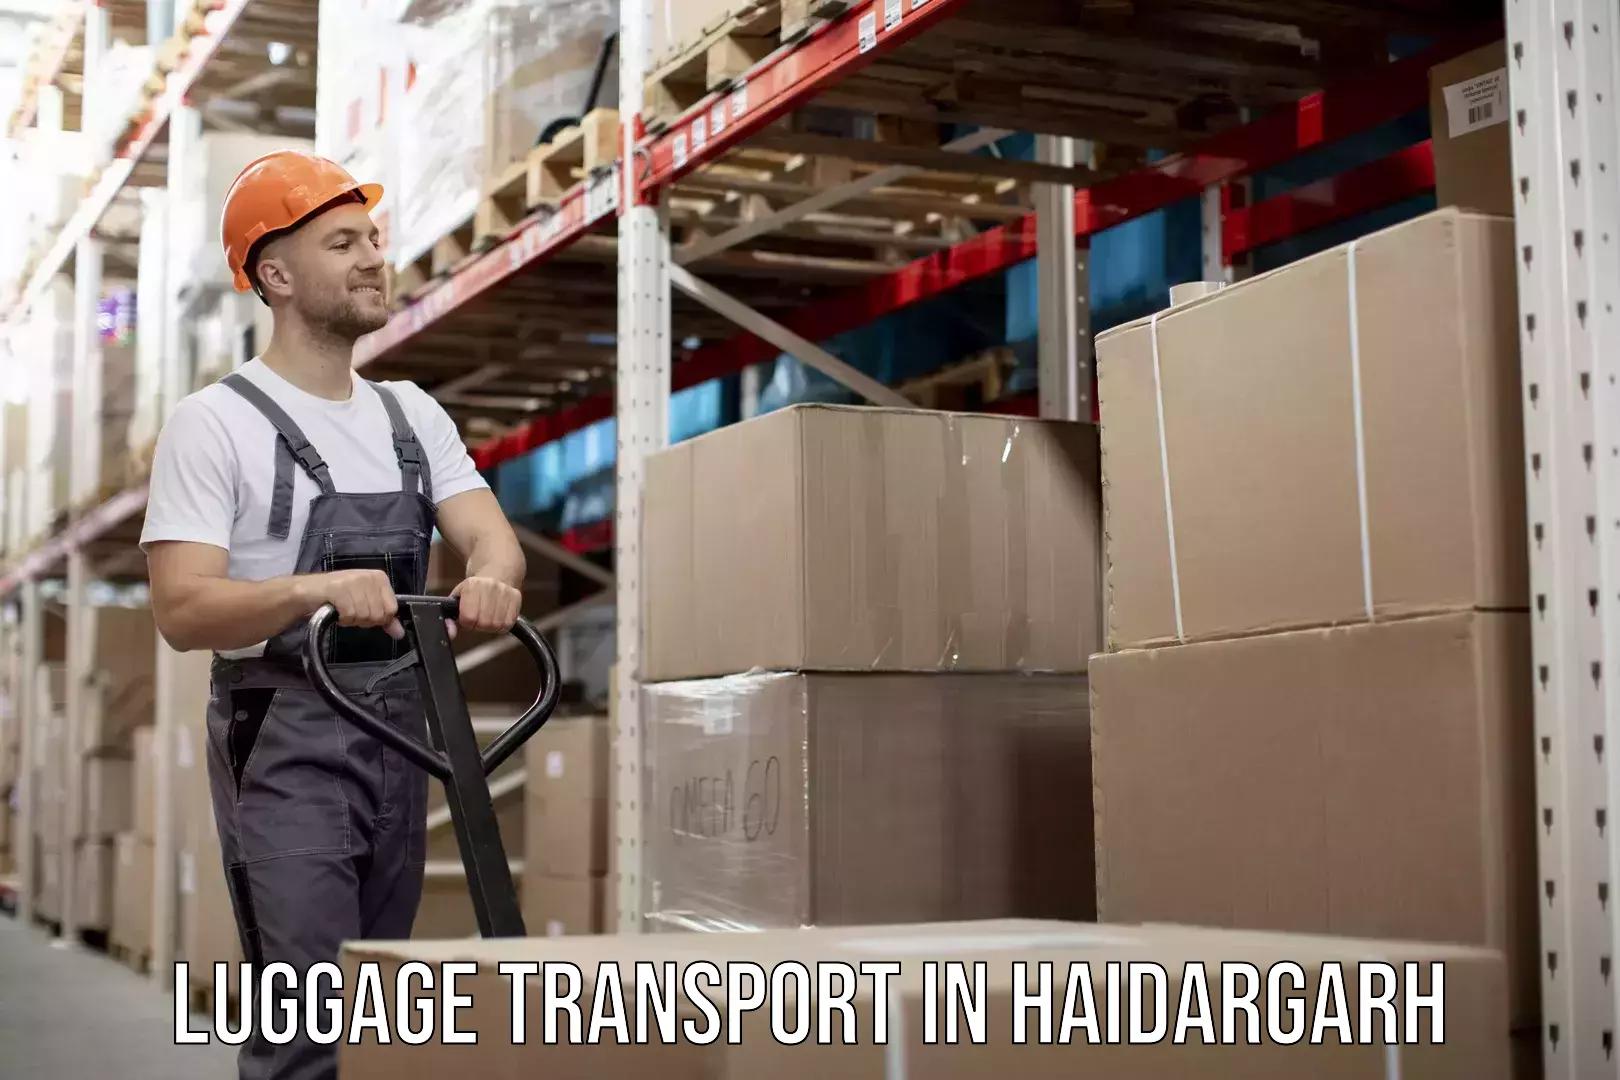 Baggage transport services in Haidargarh